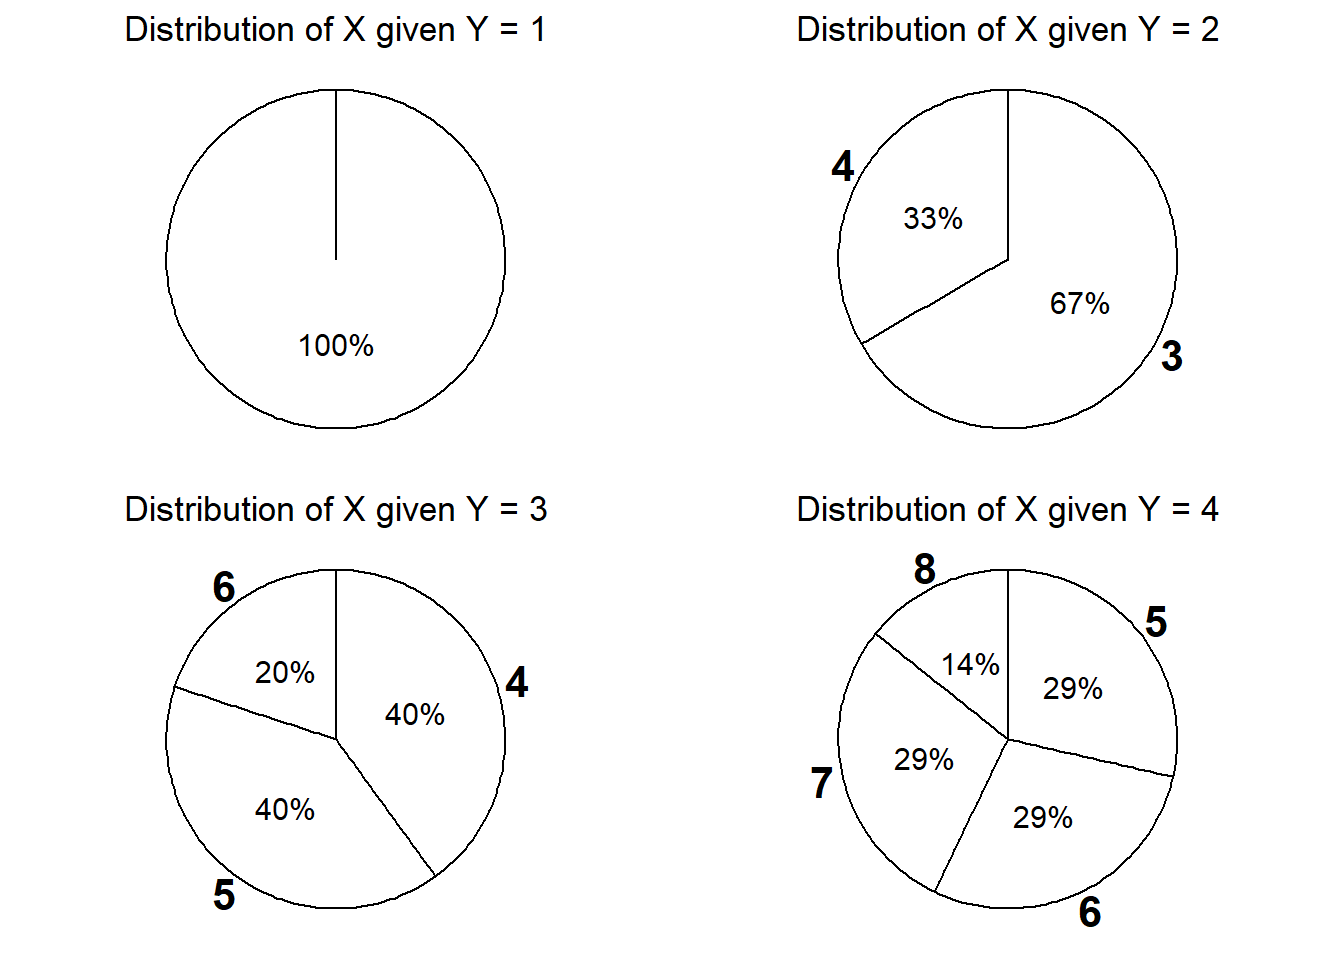 Spinners representing the family of conditional distributions of \(X\) given \(Y\). Each spinner represents a conditional distribution of \(X\) given \(Y=y\) for a particular value of \(y= 1, 2, 3, 4\).